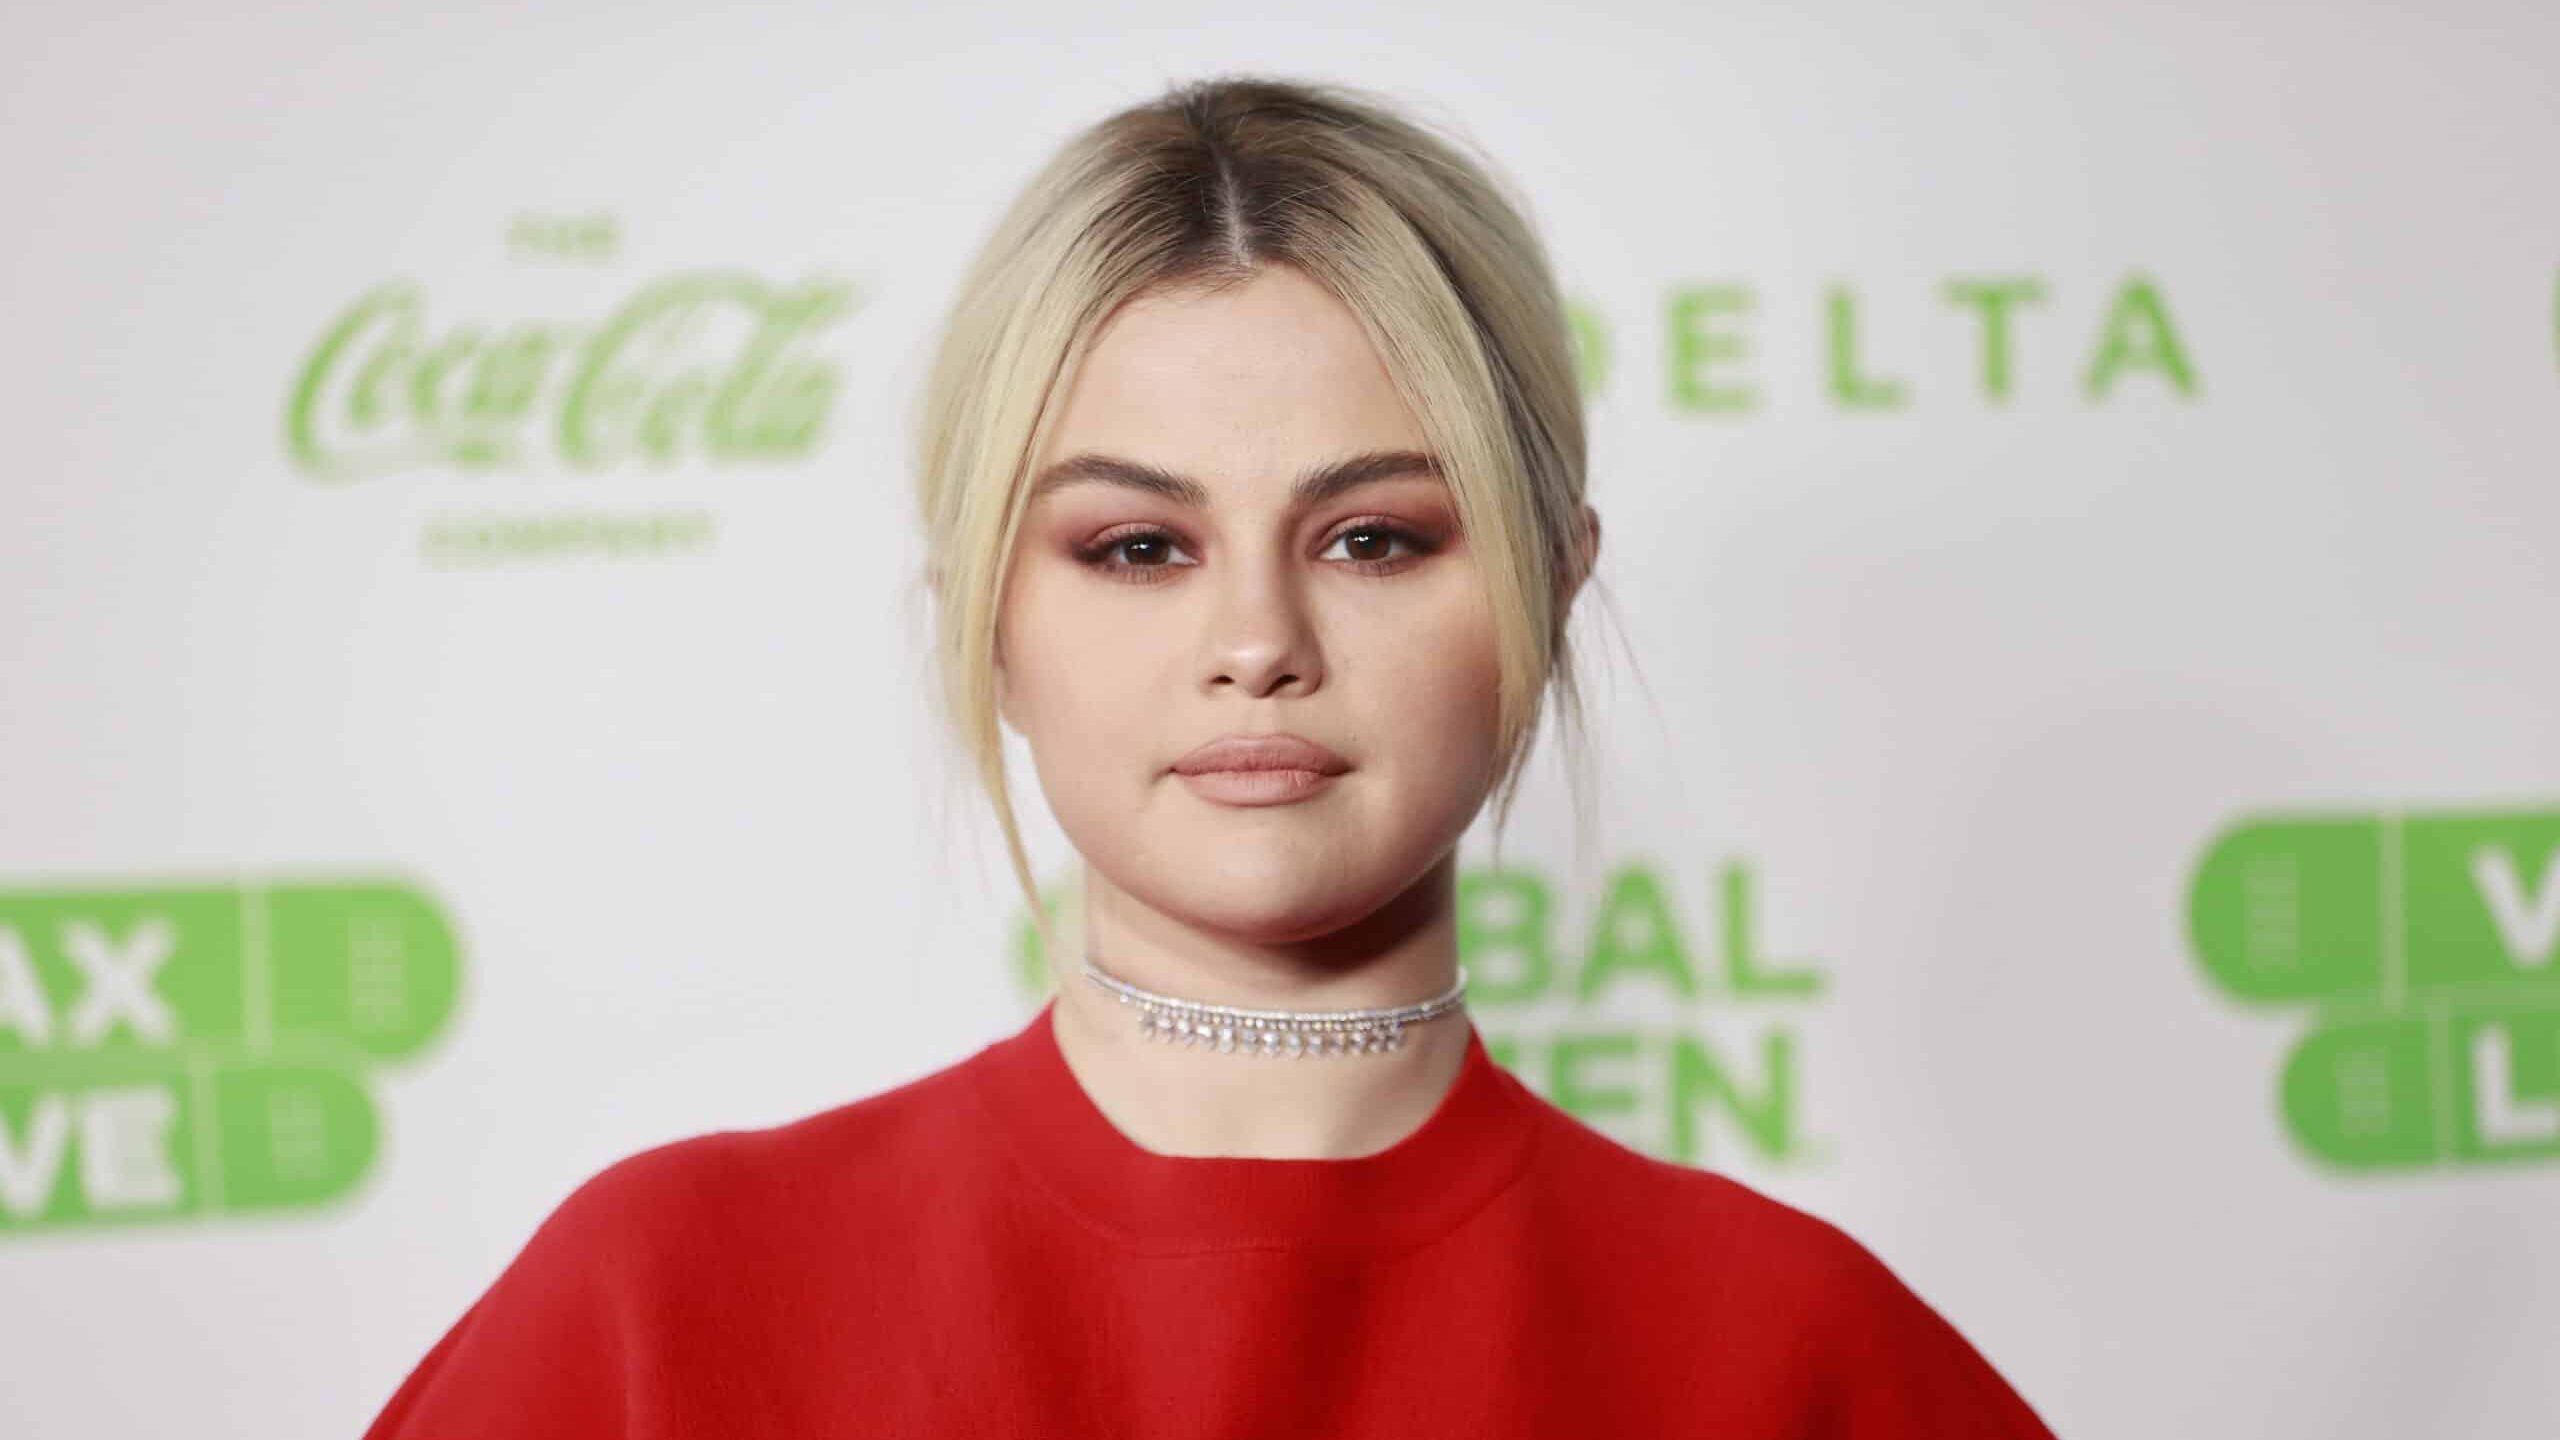 n this image released on May 2, Selena Gomez attends Global Citizen VAX LIVE: The Concert To Reunite The World at SoFi Stadium in Inglewood, California. Global Citizen VAX LIVE: The Concert To Reunite The World will be broadcast on May 8, 2021.